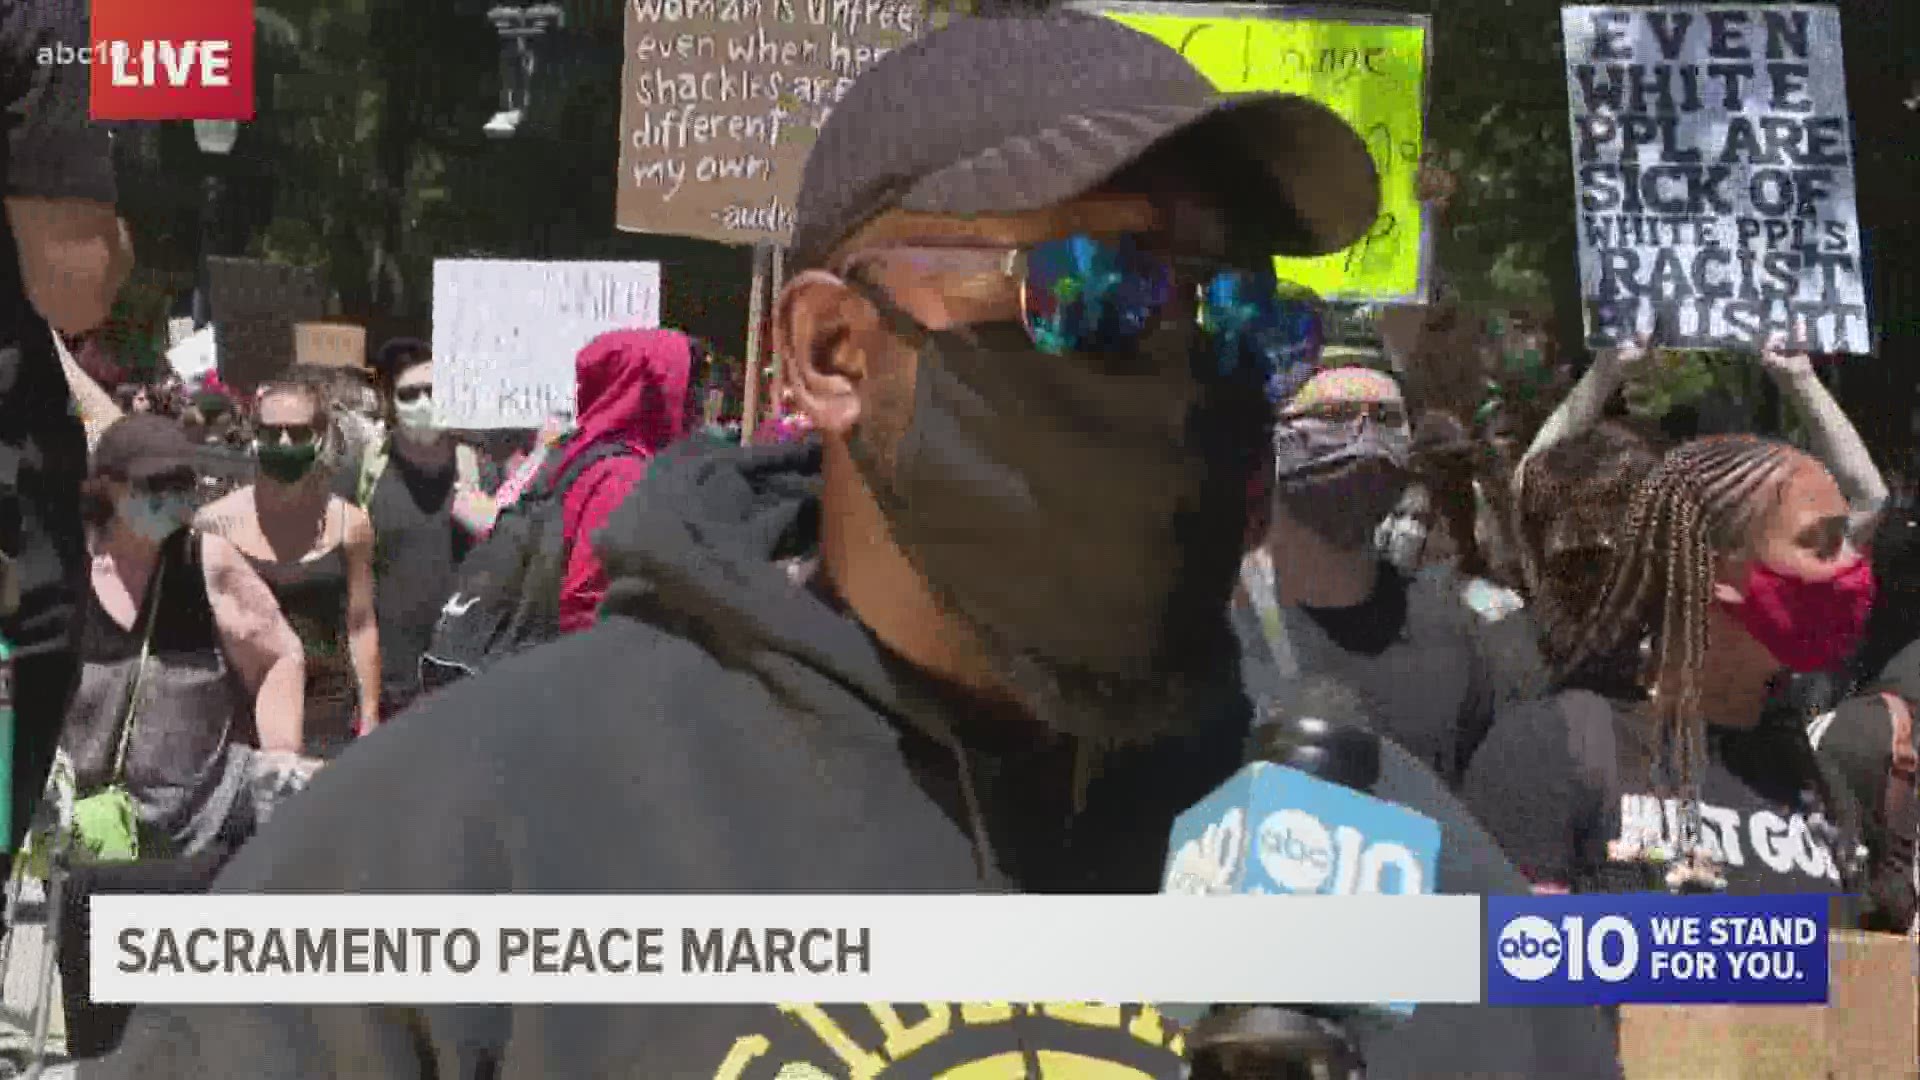 Actor Christopher Michael Holley talks with Mark S. Allen at the Sacramento Peace March about the need for change, saying, "this is just the beginning."